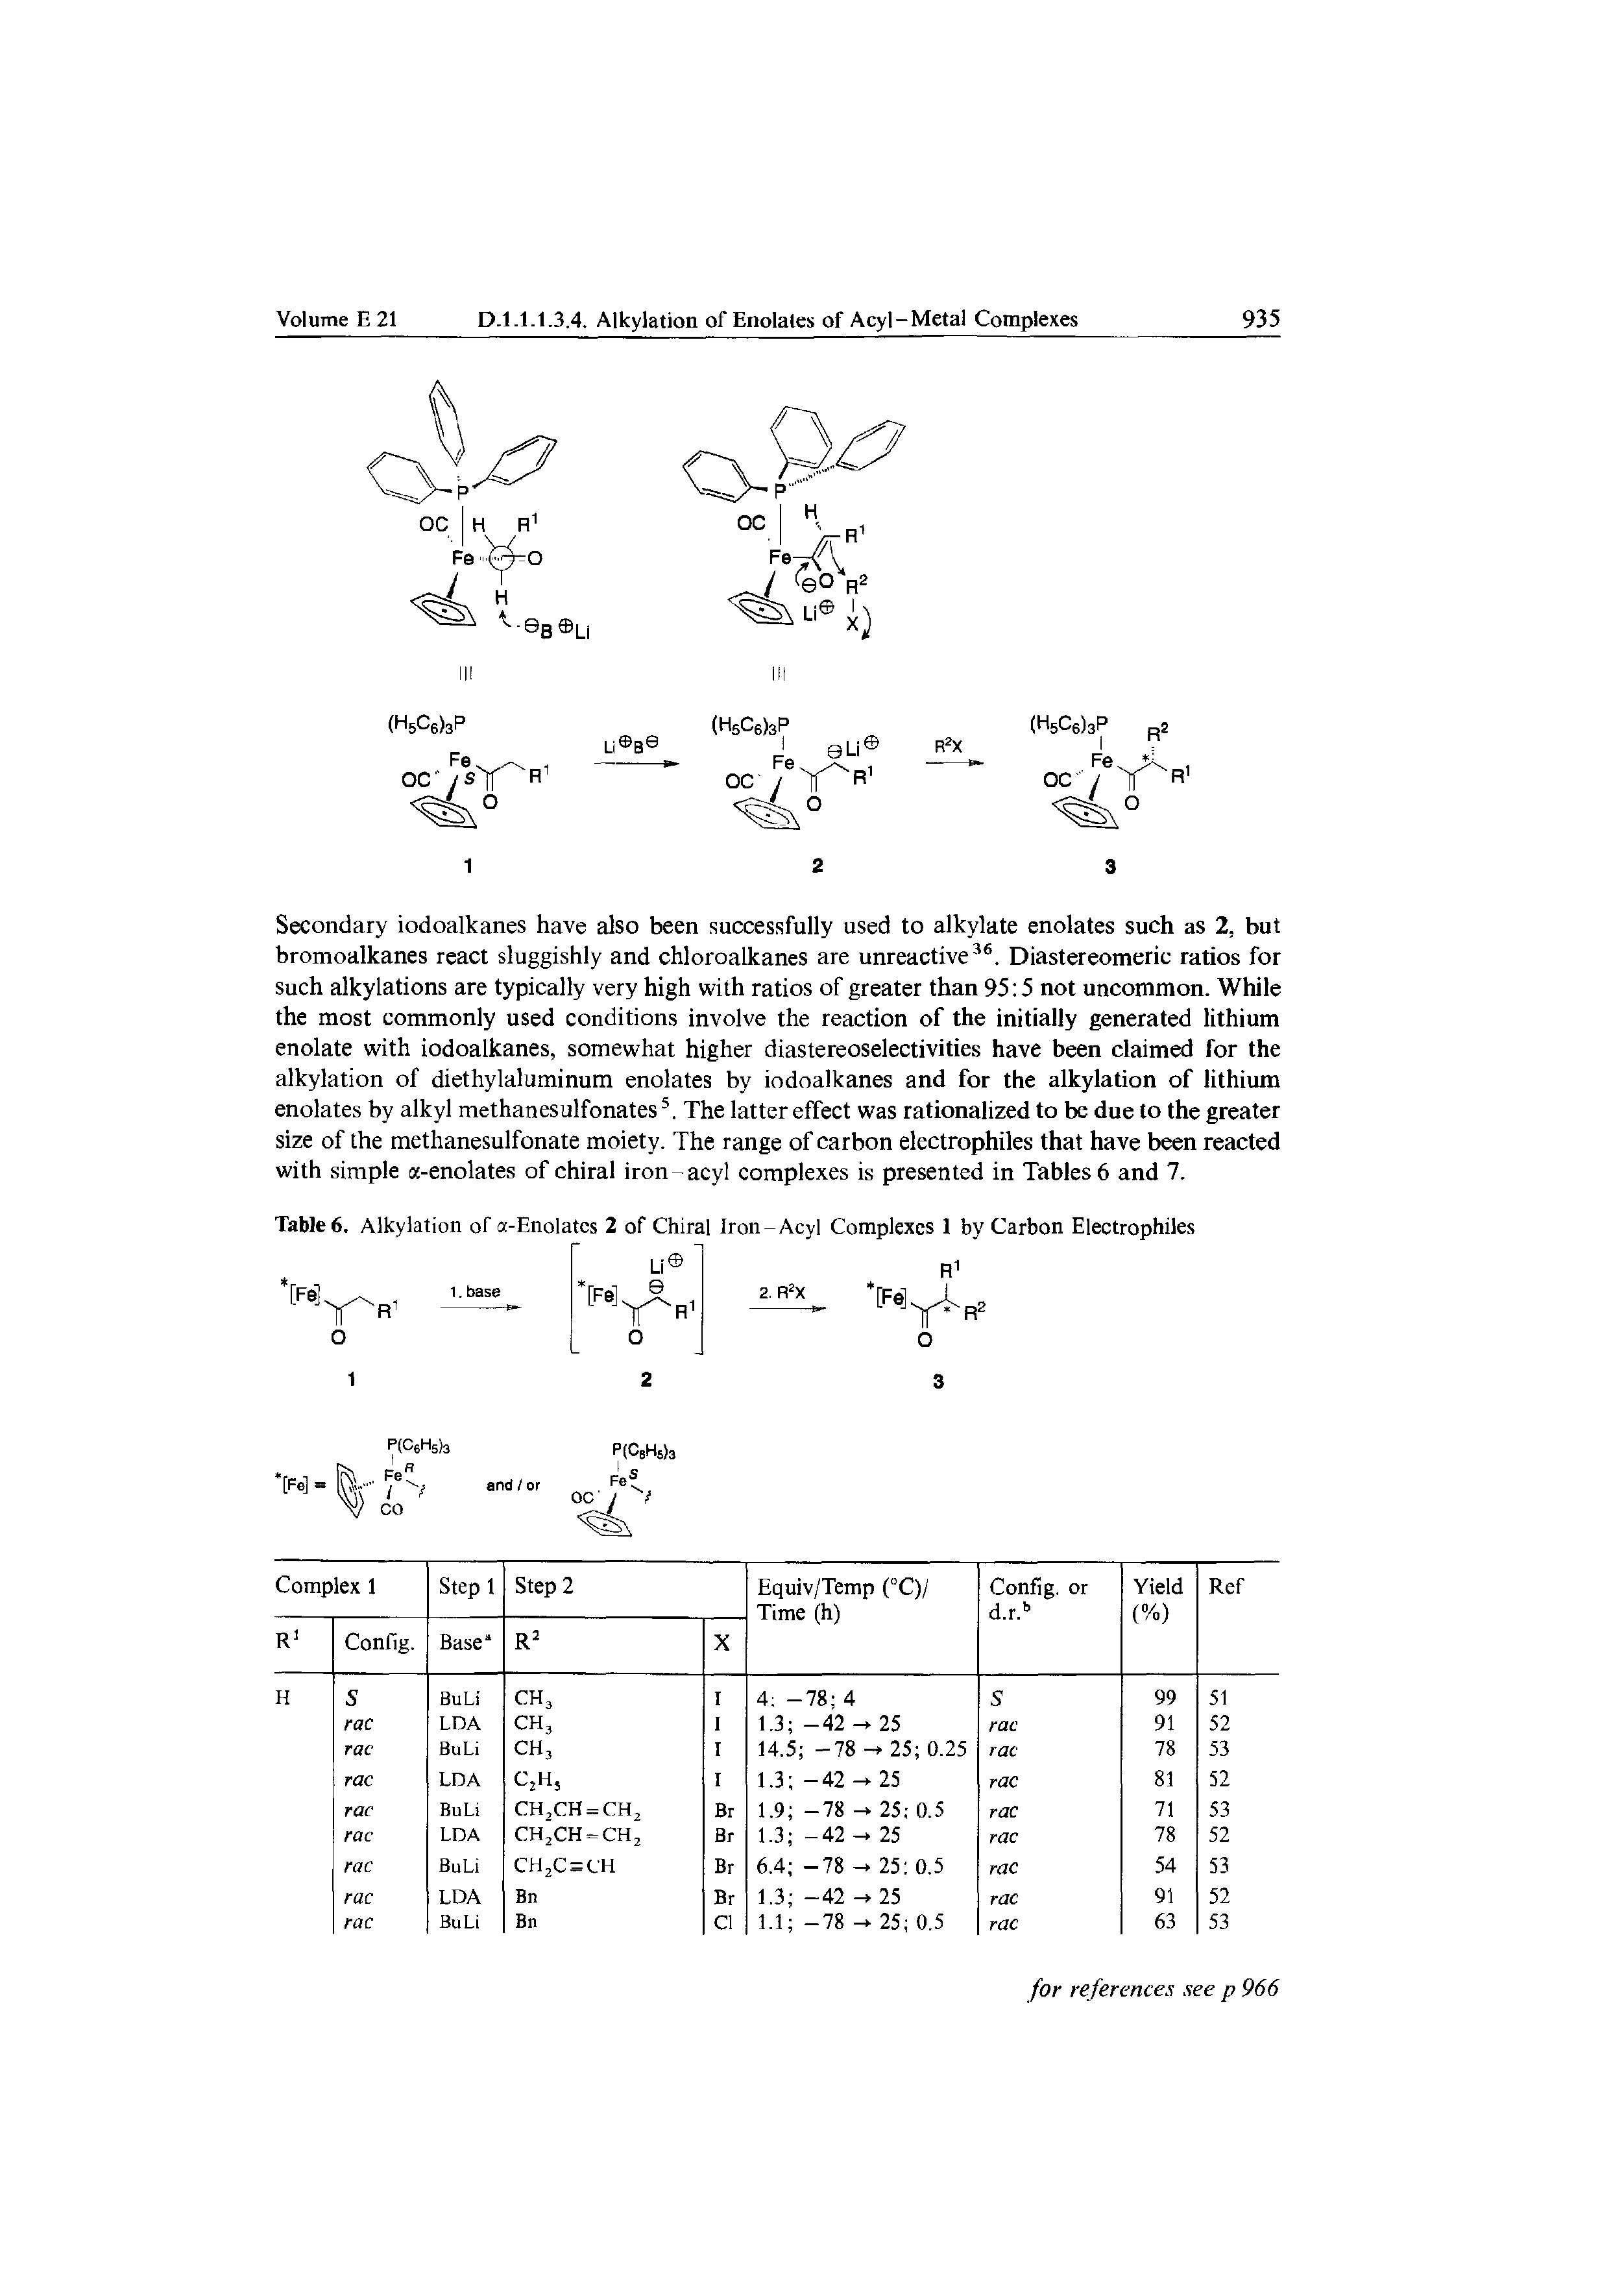 Table 6. Alkylation of a-Enolates 2 of Chiral Iron-Acyl Complexes 1 by Carbon Electrophiles...